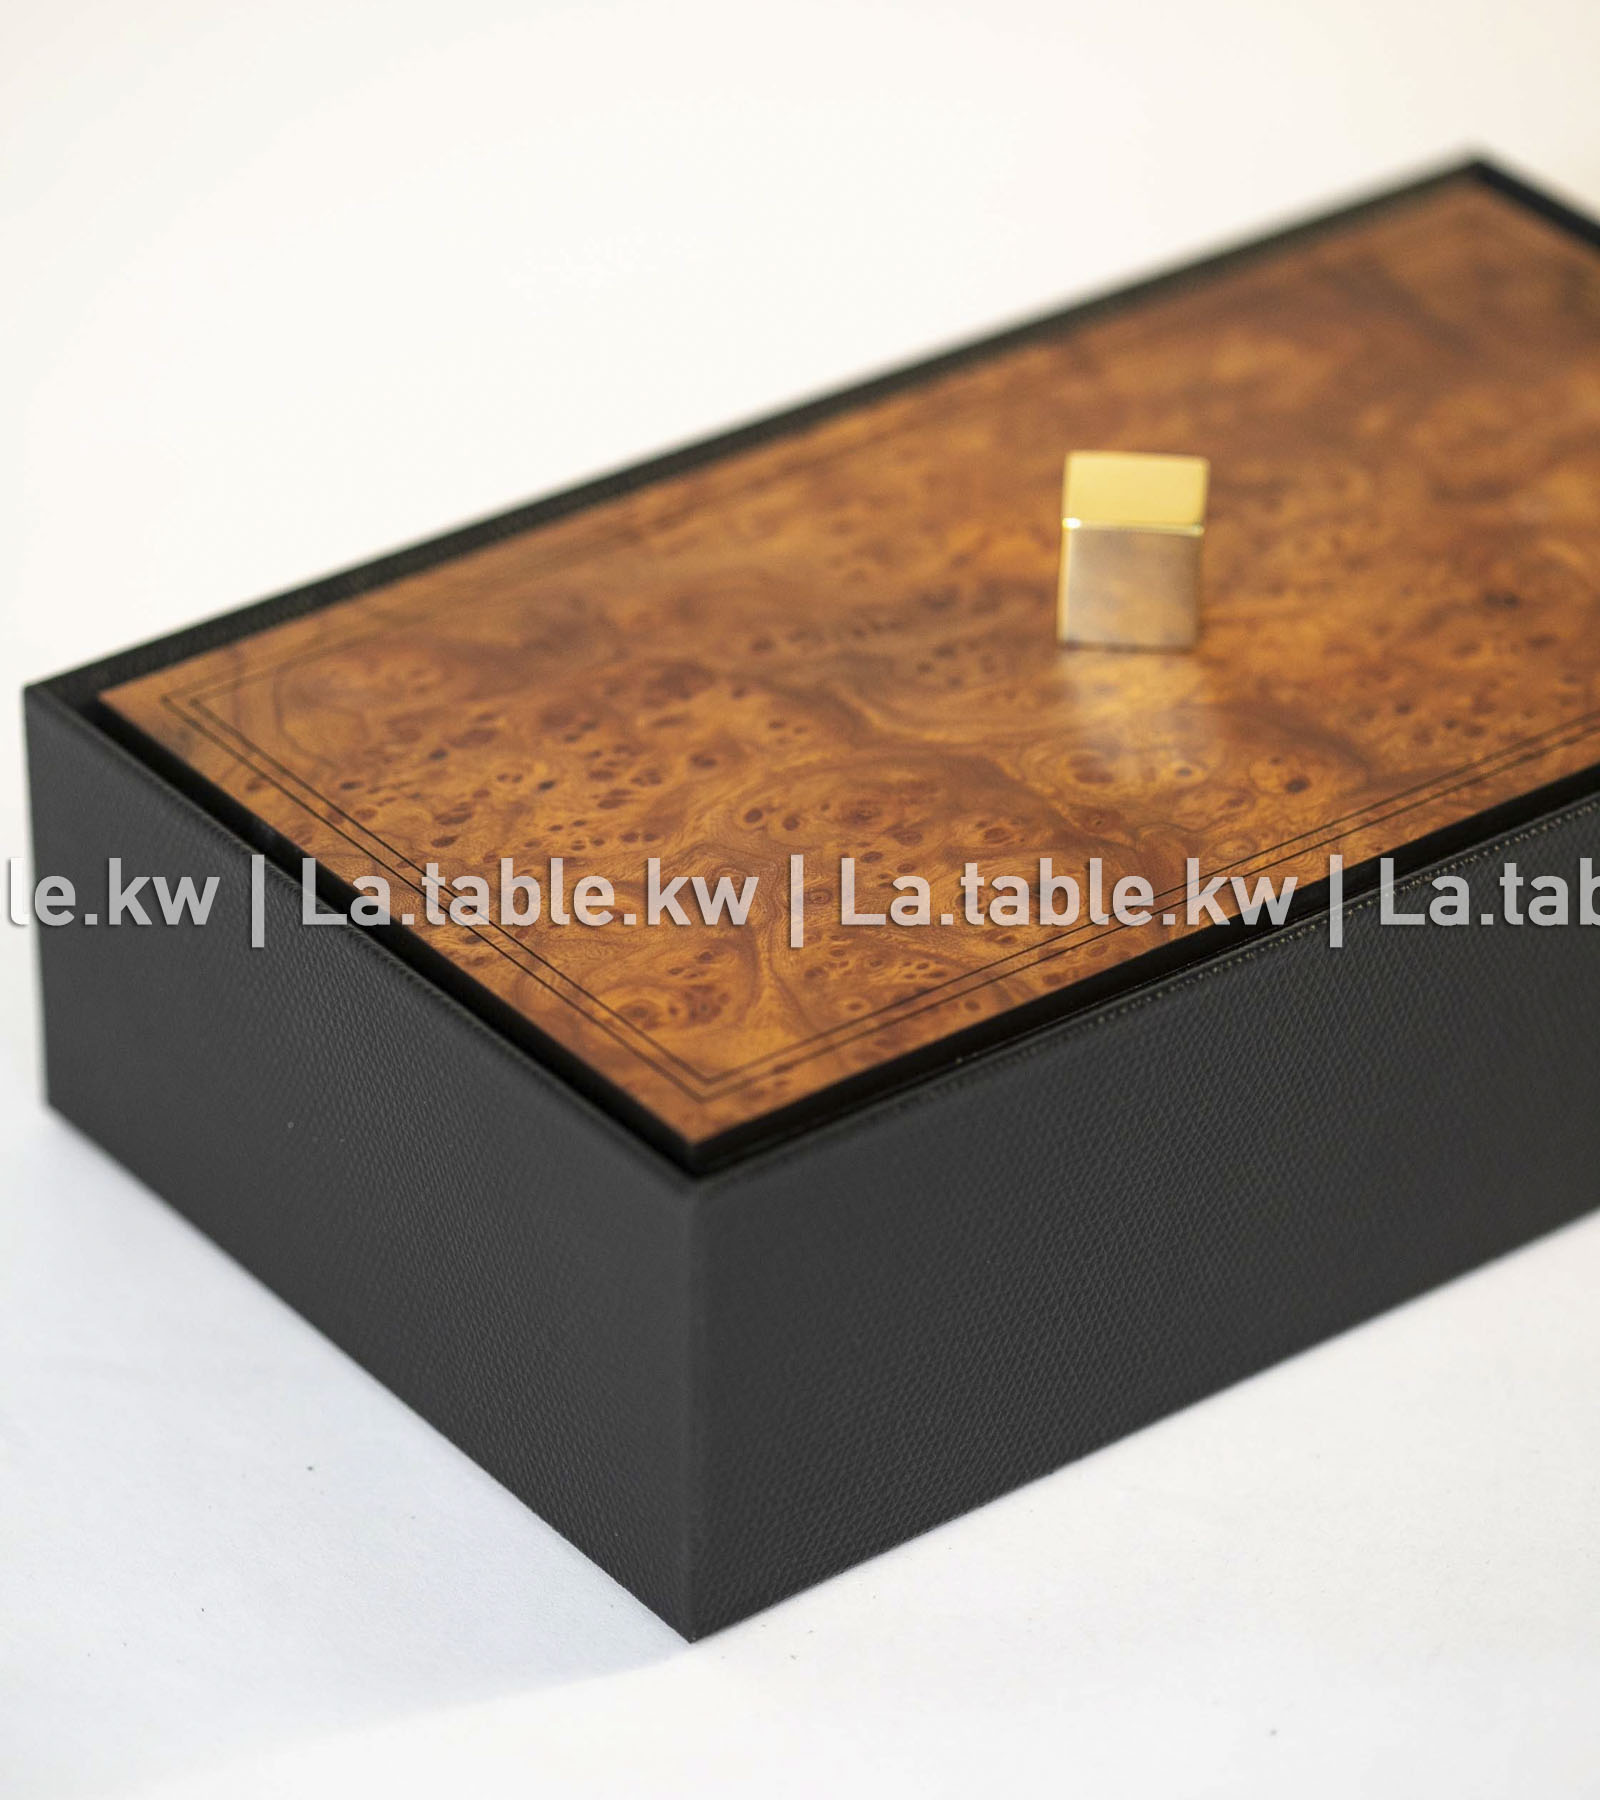 Black Leather Storage Box with Wooden Lid